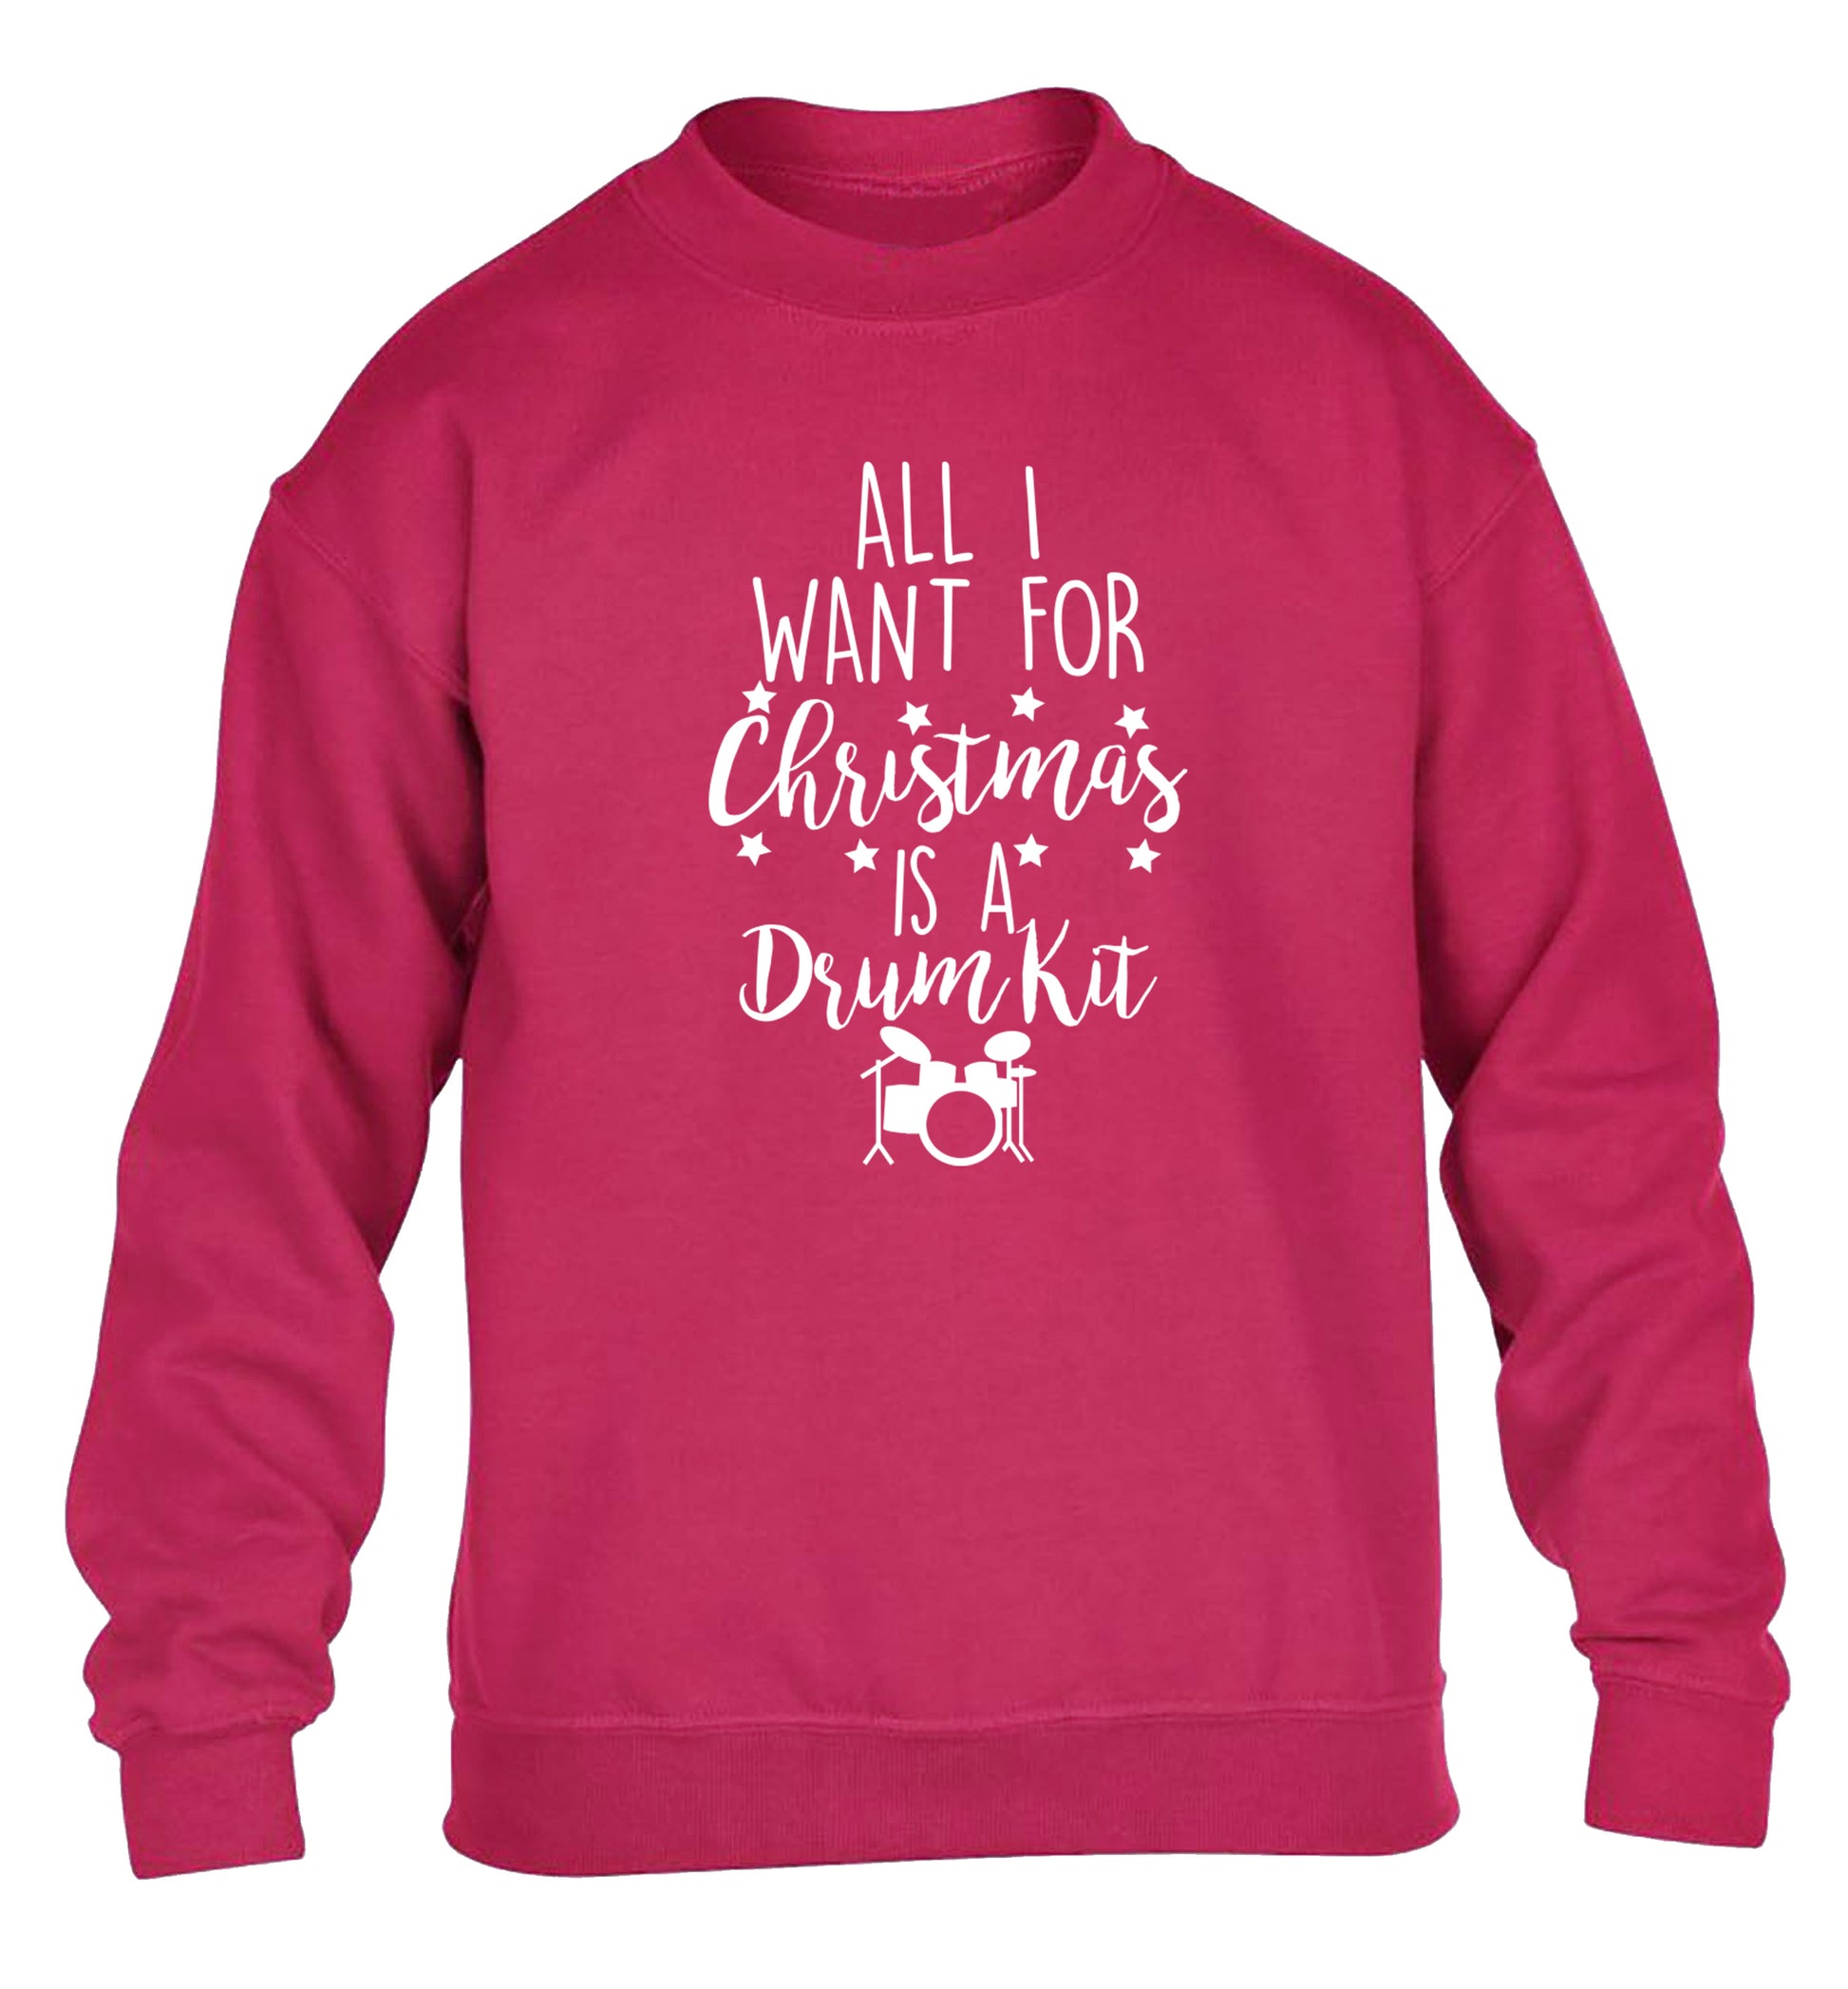 All I want for Christmas is a drum kit! children's pink sweater 12-14 Years